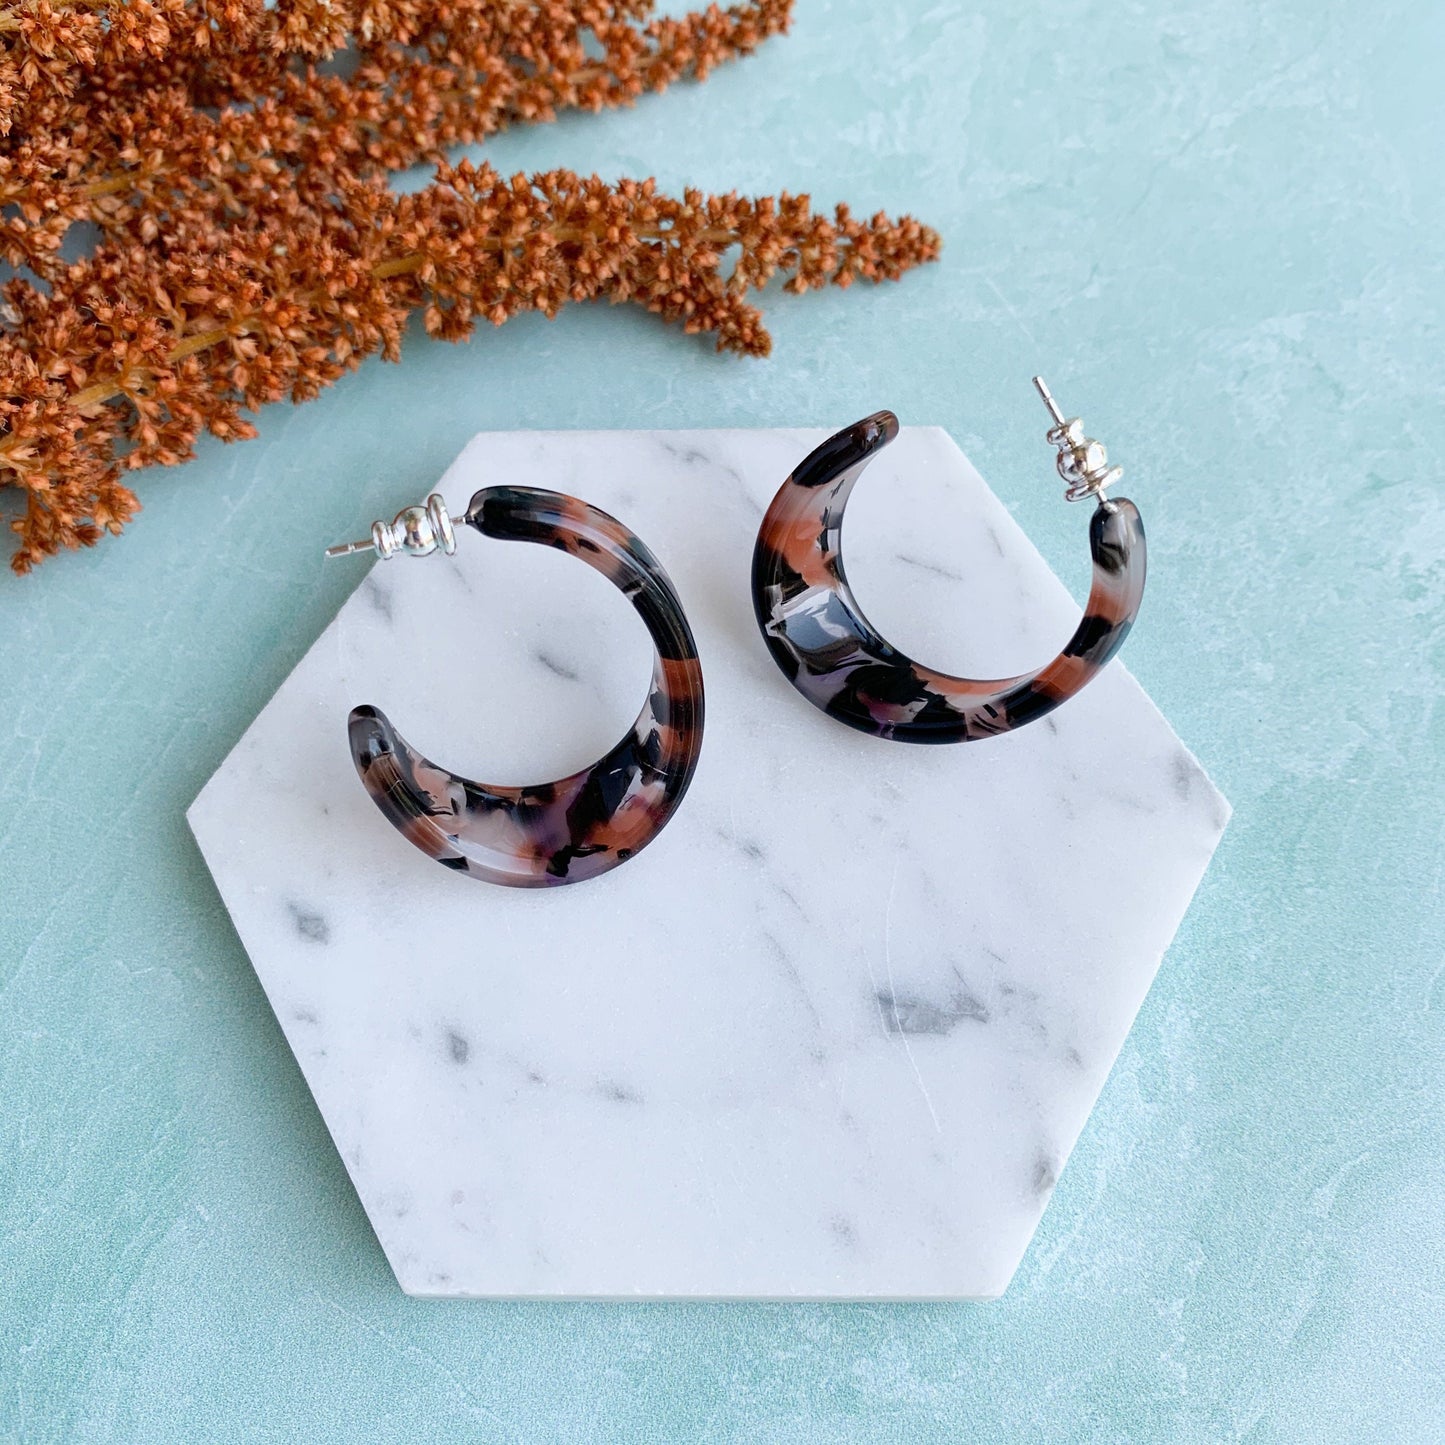 Illusion Hoops in Koi | Tortoise Shell Red and Black Resin Acetate Modern Statement Hoop Earrings 925 Silver Posts